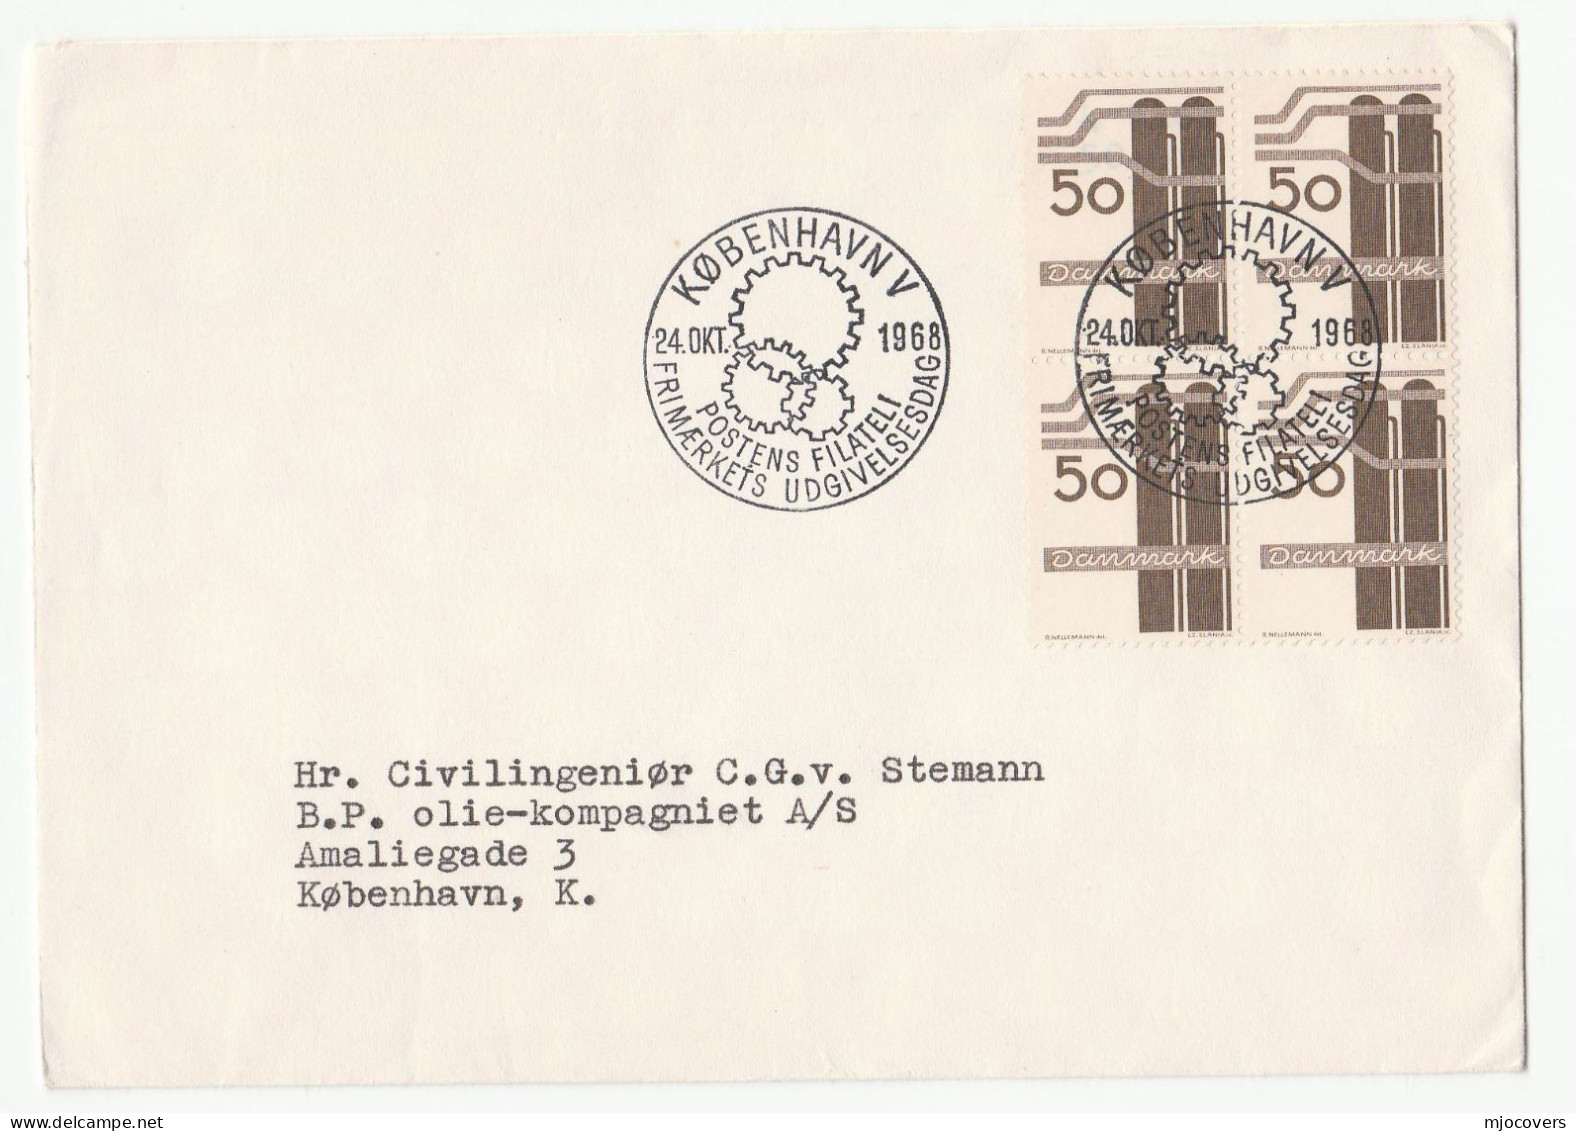 SHELL OIL To BP OIL 1968 Denmark Cover With LETTER Energy Petrochemicals Fdc Stamps - Pétrole